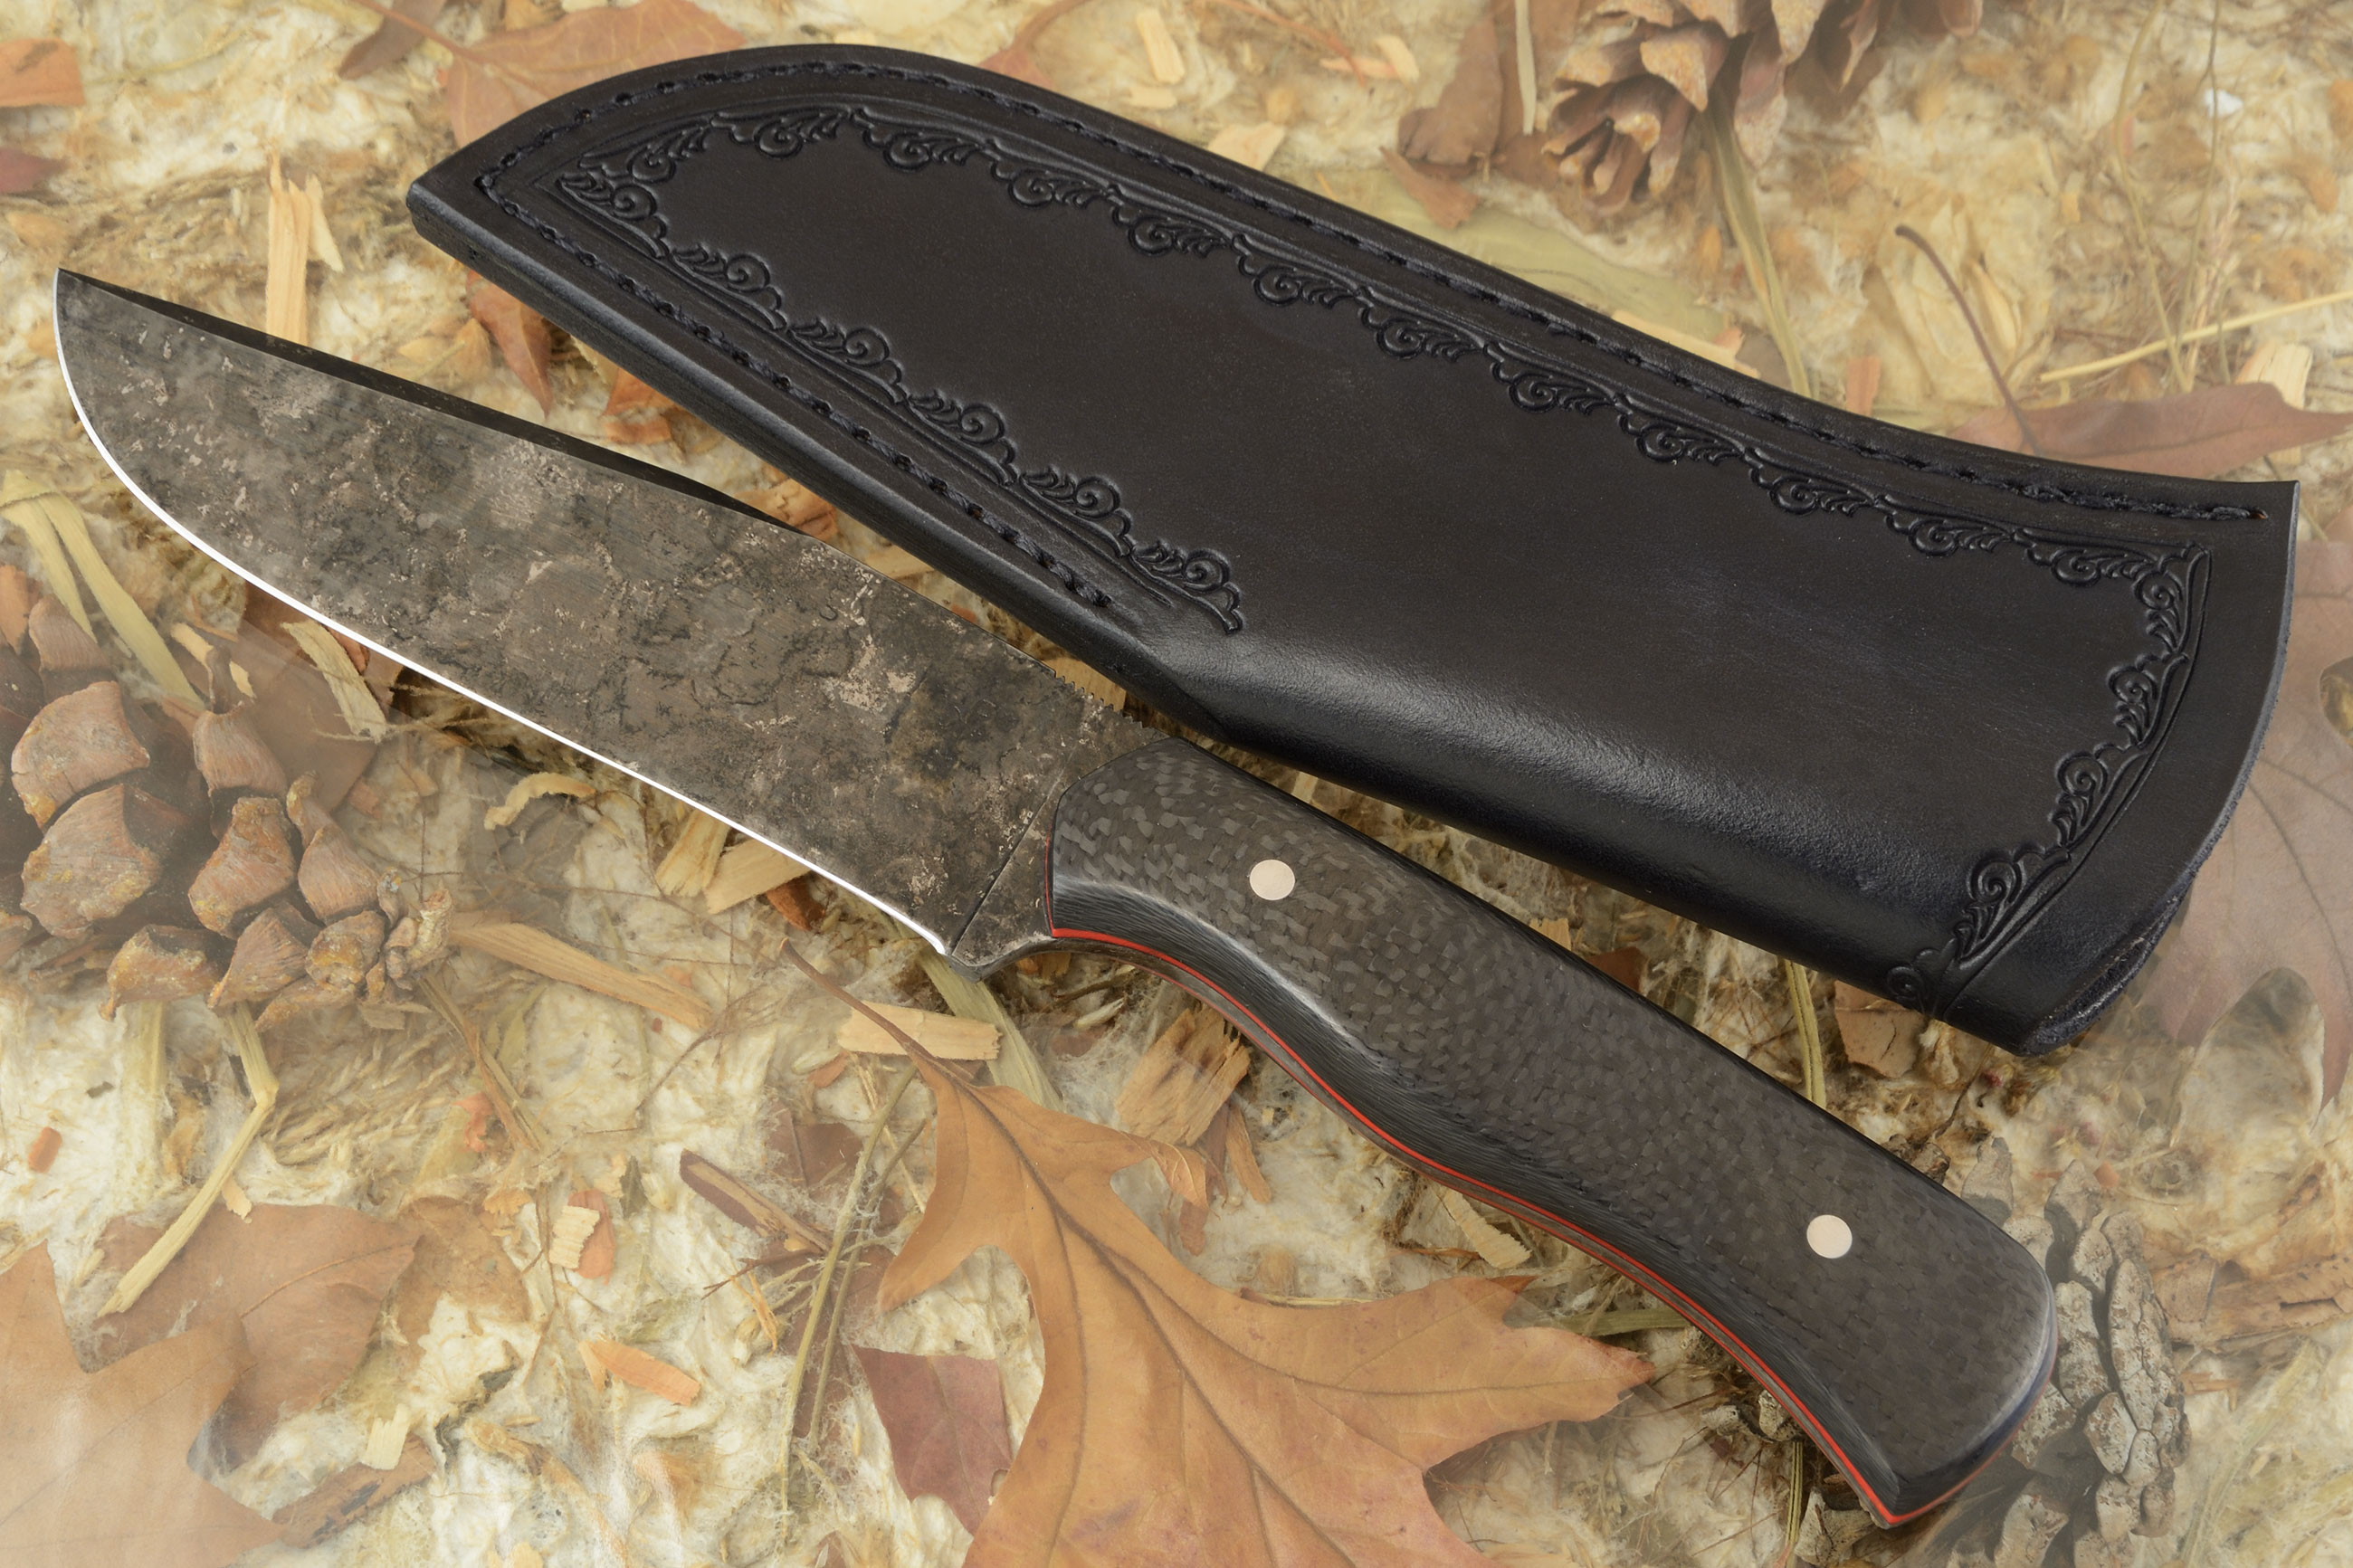 True Knives Introduces a Do-It-All Fixed Blade With Tactical Style